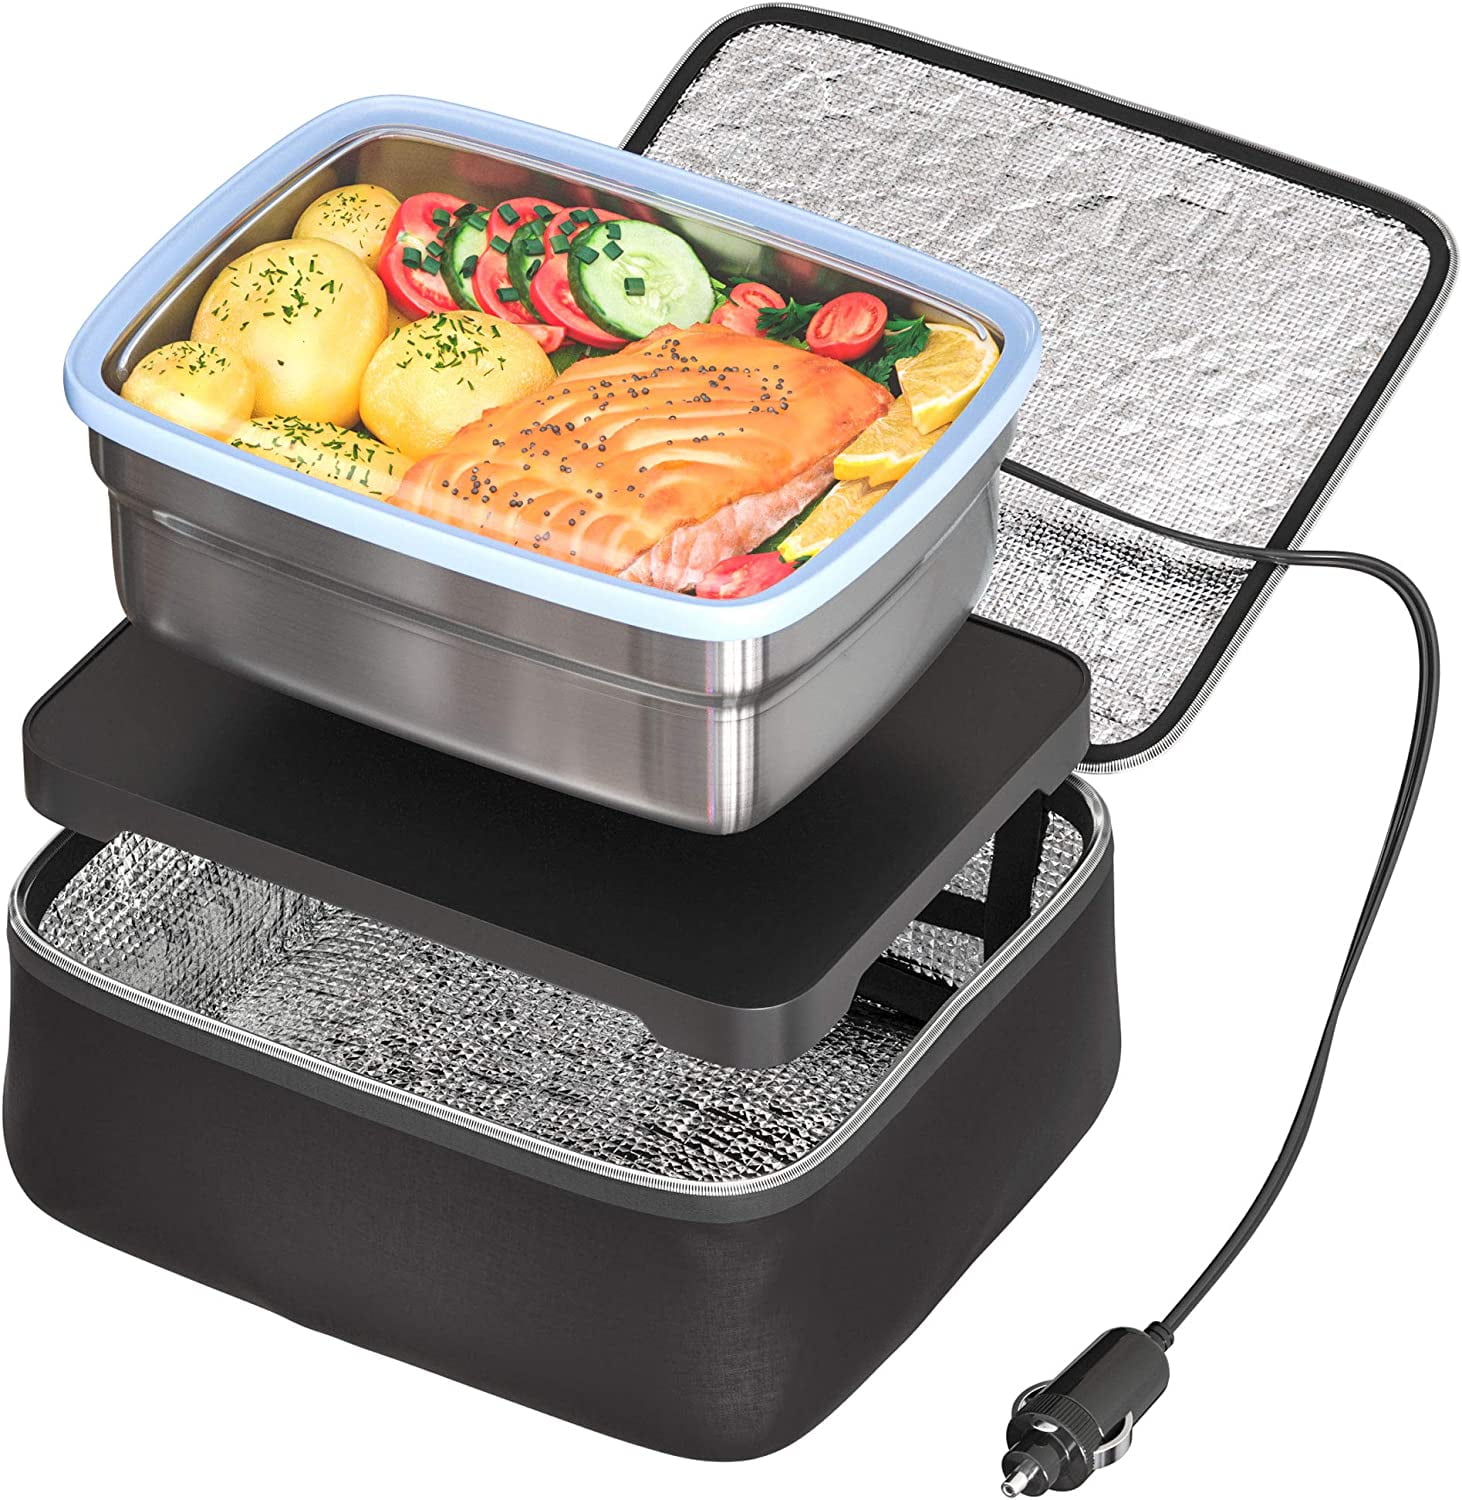 Langtaojin Portable Oven 12V,Food Warmer for Truckers,Car Heated Lunch Box Portable Personal Microwave for Road Trip/Office Work/Picnic/Camping